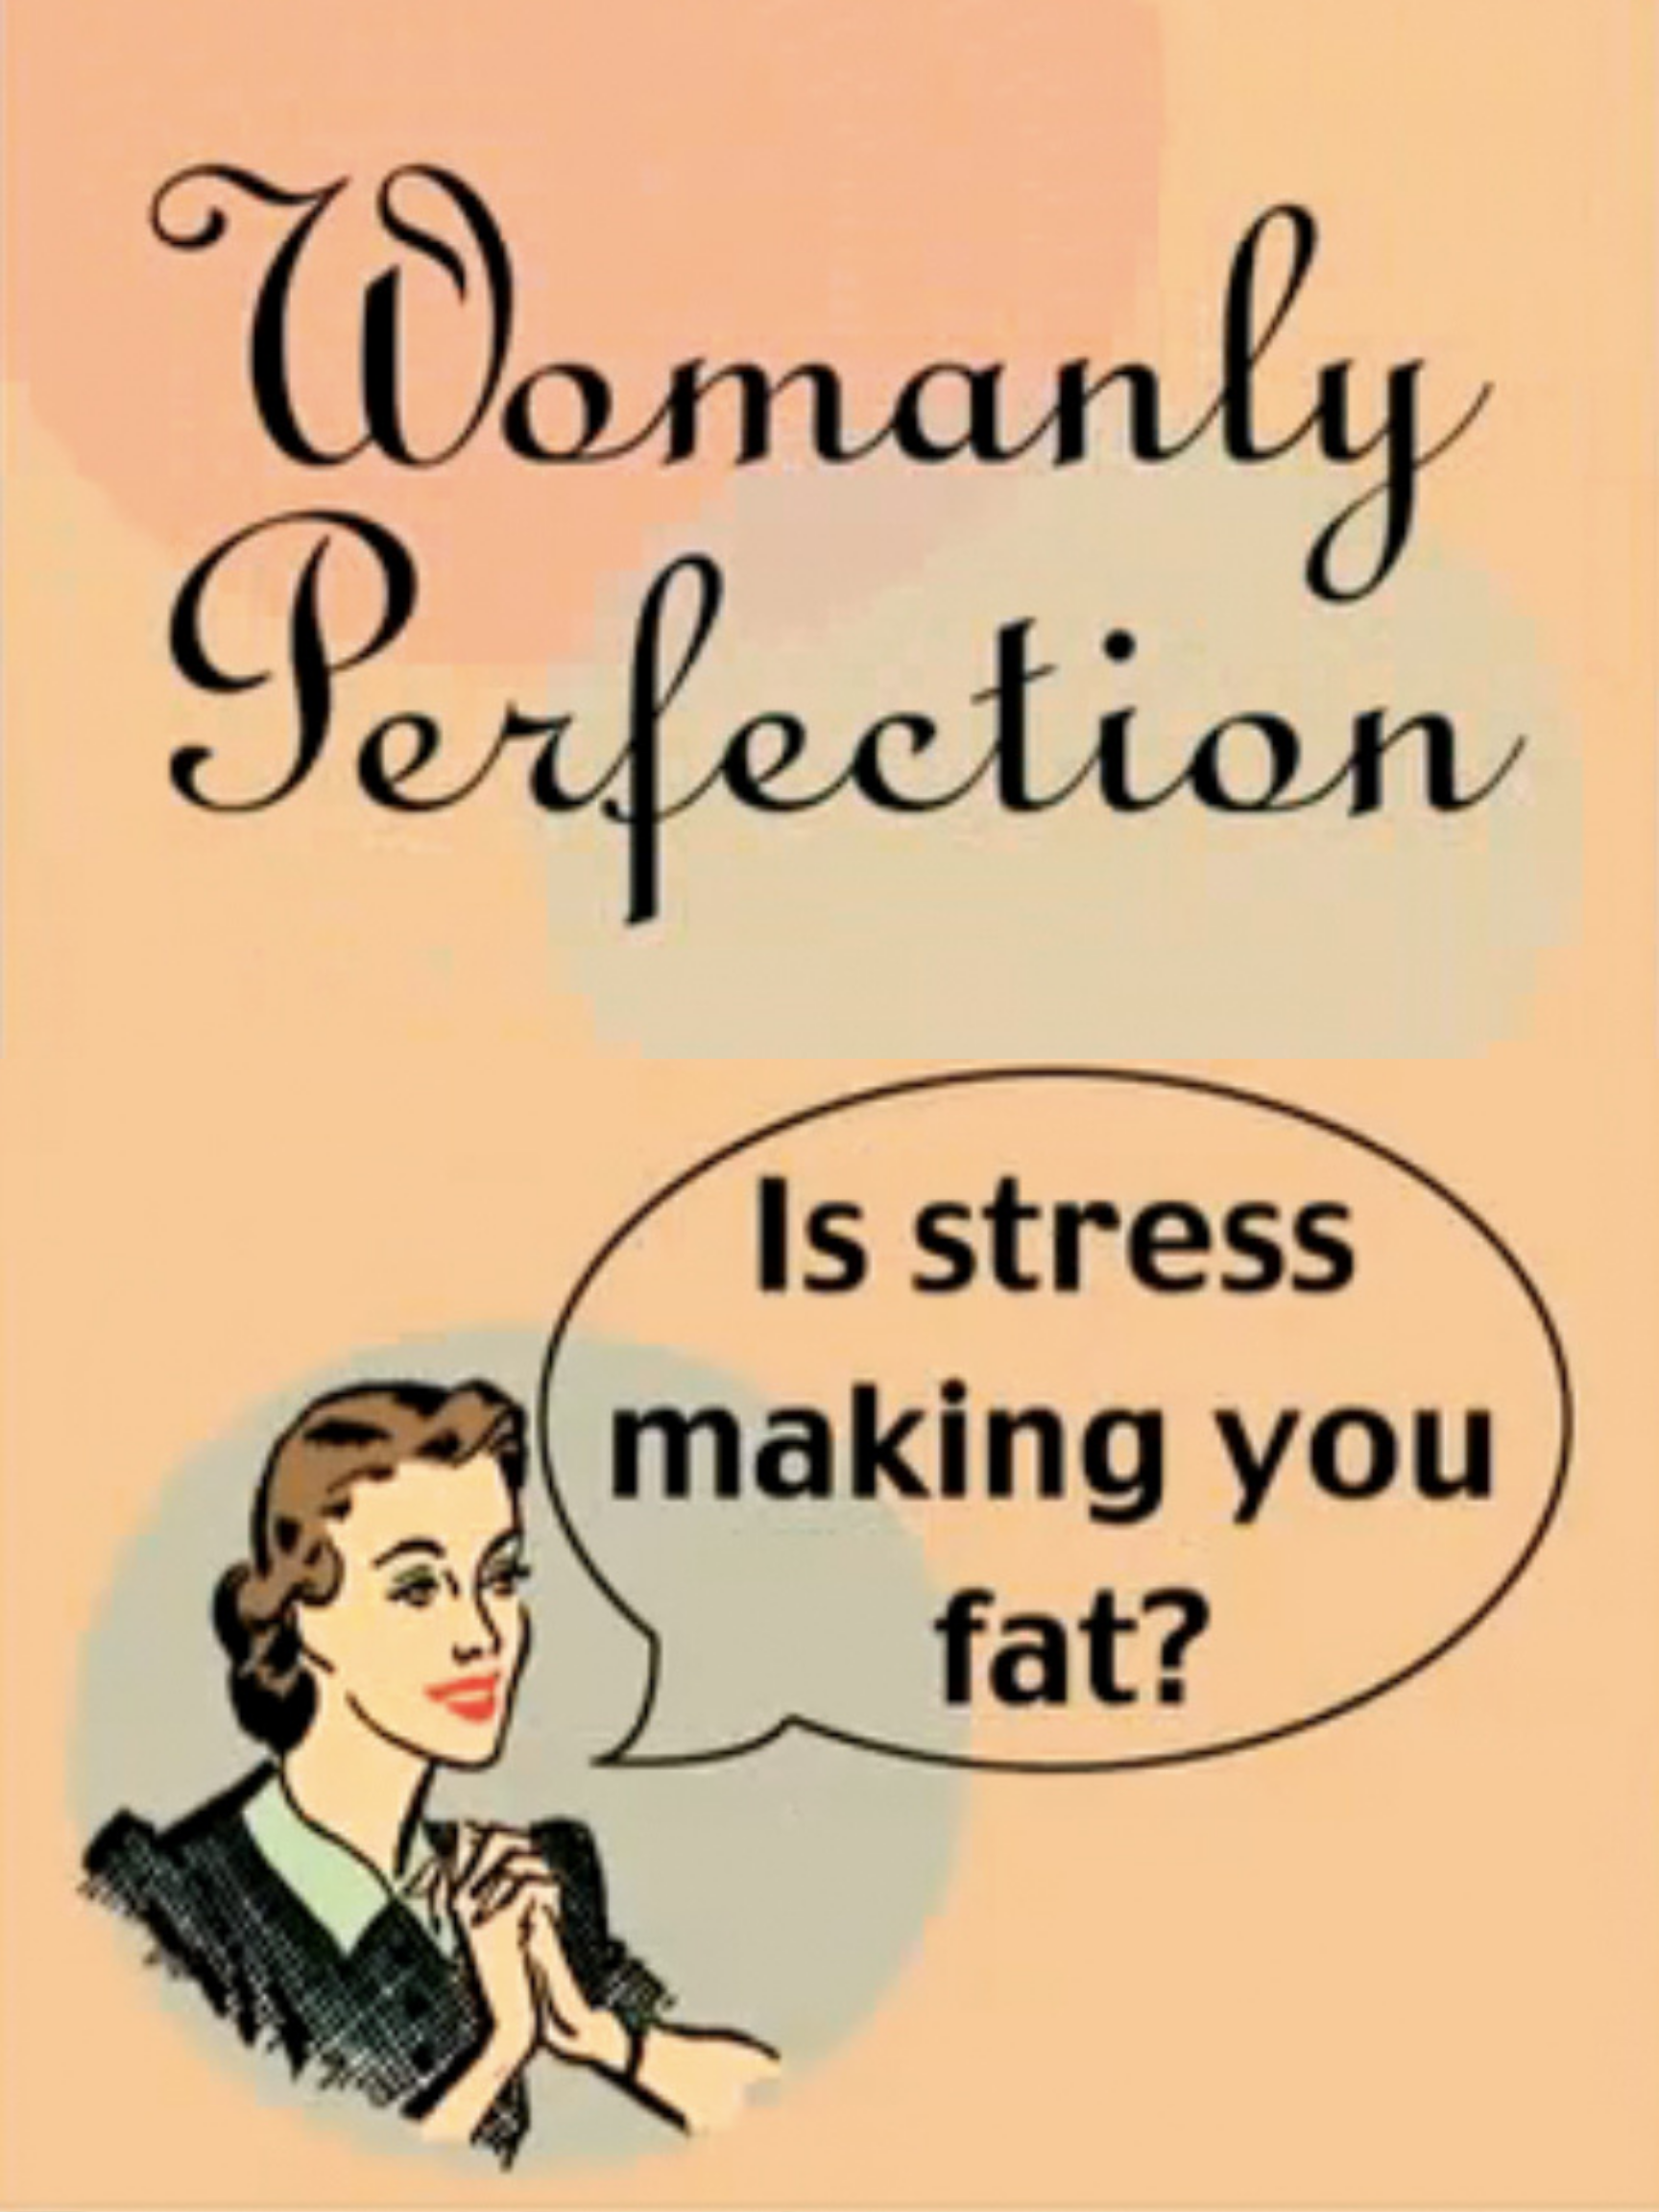 Womanly Perfection Poster.png